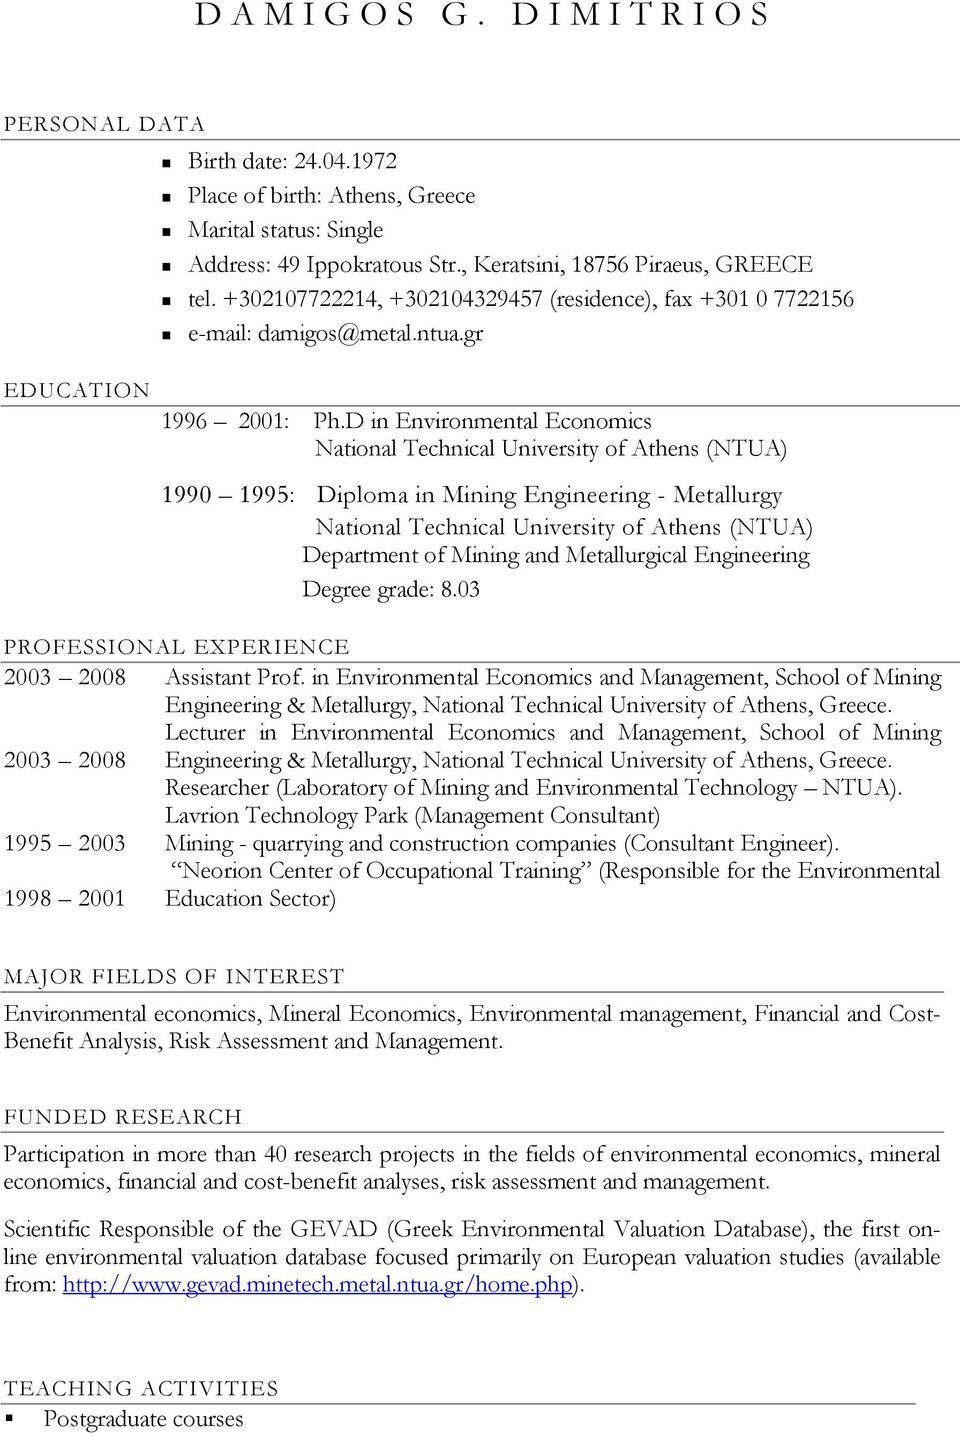 D in Environmental Economics National Technical University of Athens (NTUA) 1990 1995: Diploma in Mining Engineering - Metallurgy National Technical University of Athens (NTUA) Department of Mining